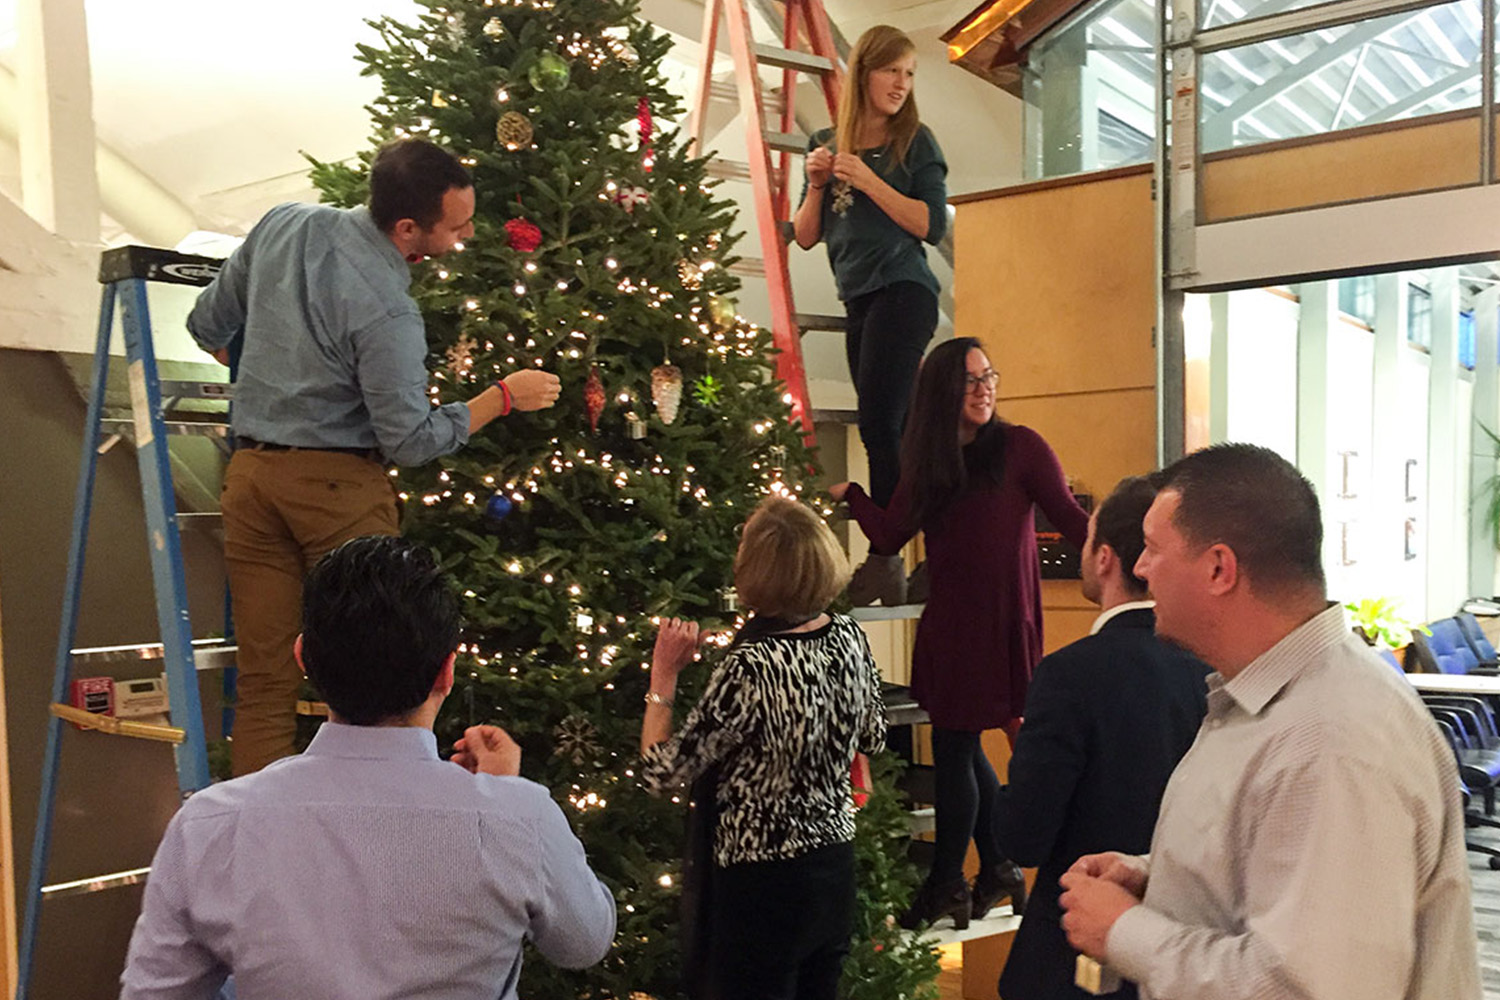 Annual tree trimming at Tocci's headquarters. Staff gather around with ornaments, some standing on ladders to decorate the higher parts of the tree